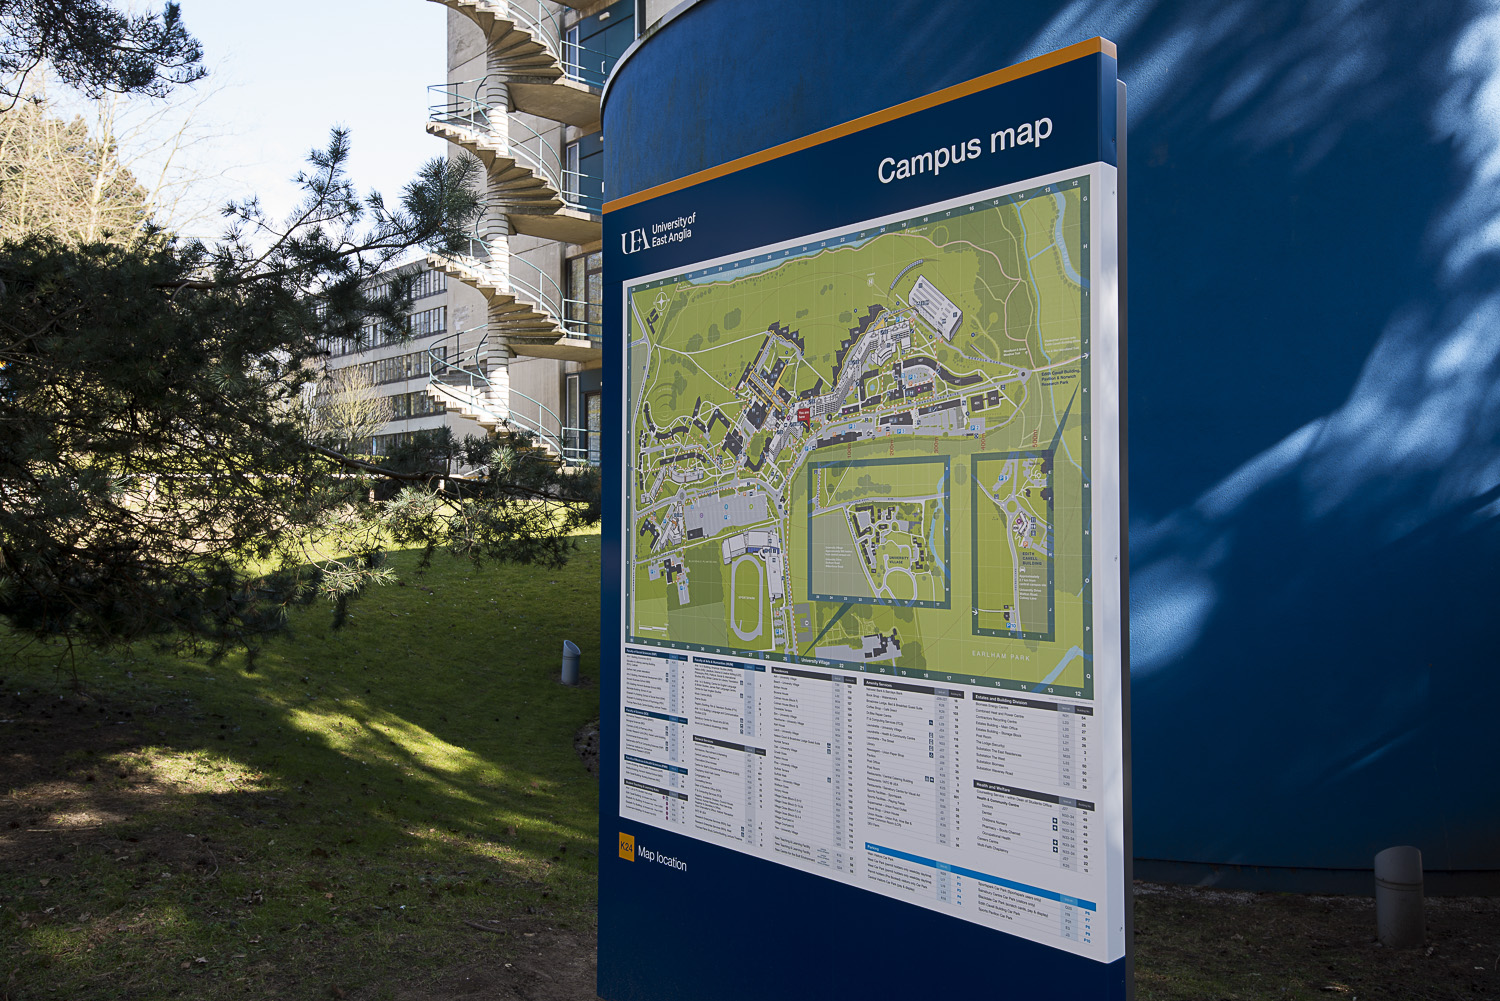 Example of outdoor wayfinding signage (showing UEA campus map) by ABG Design for the University of East Anglia